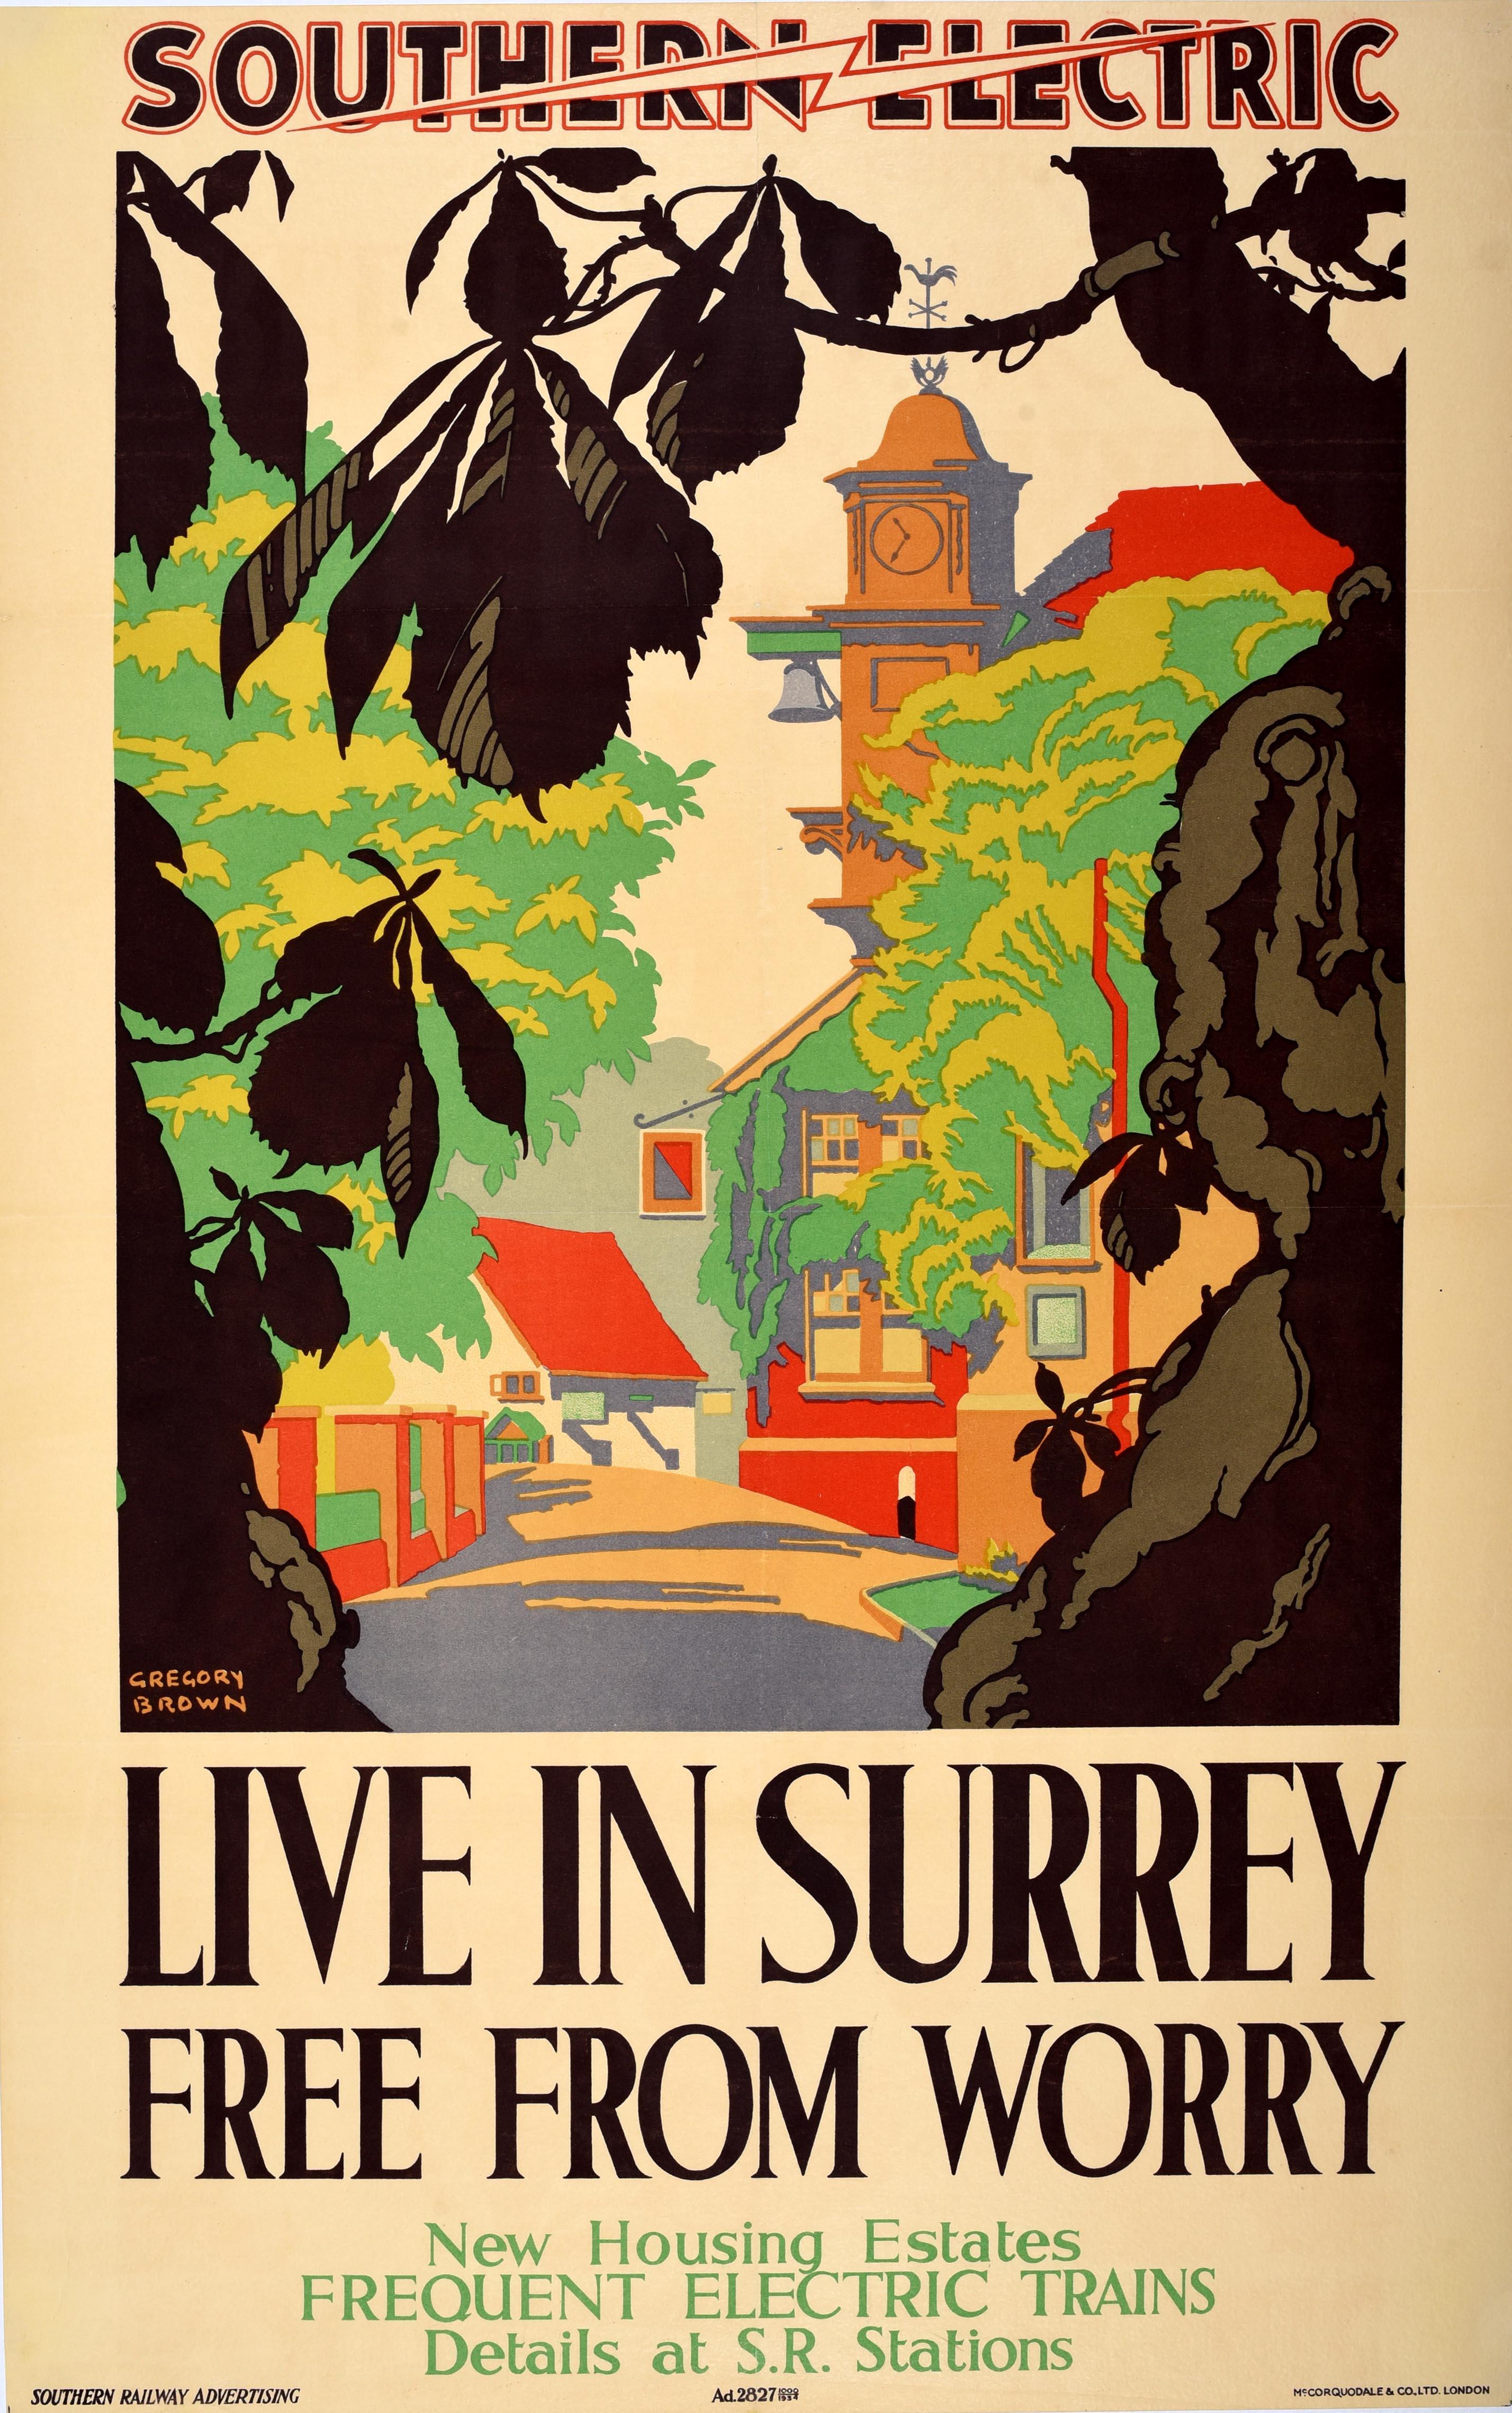 Frederic Gregory Brown Print - Original Vintage Travel Poster Live In Surrey Free From Worry Southern Electric